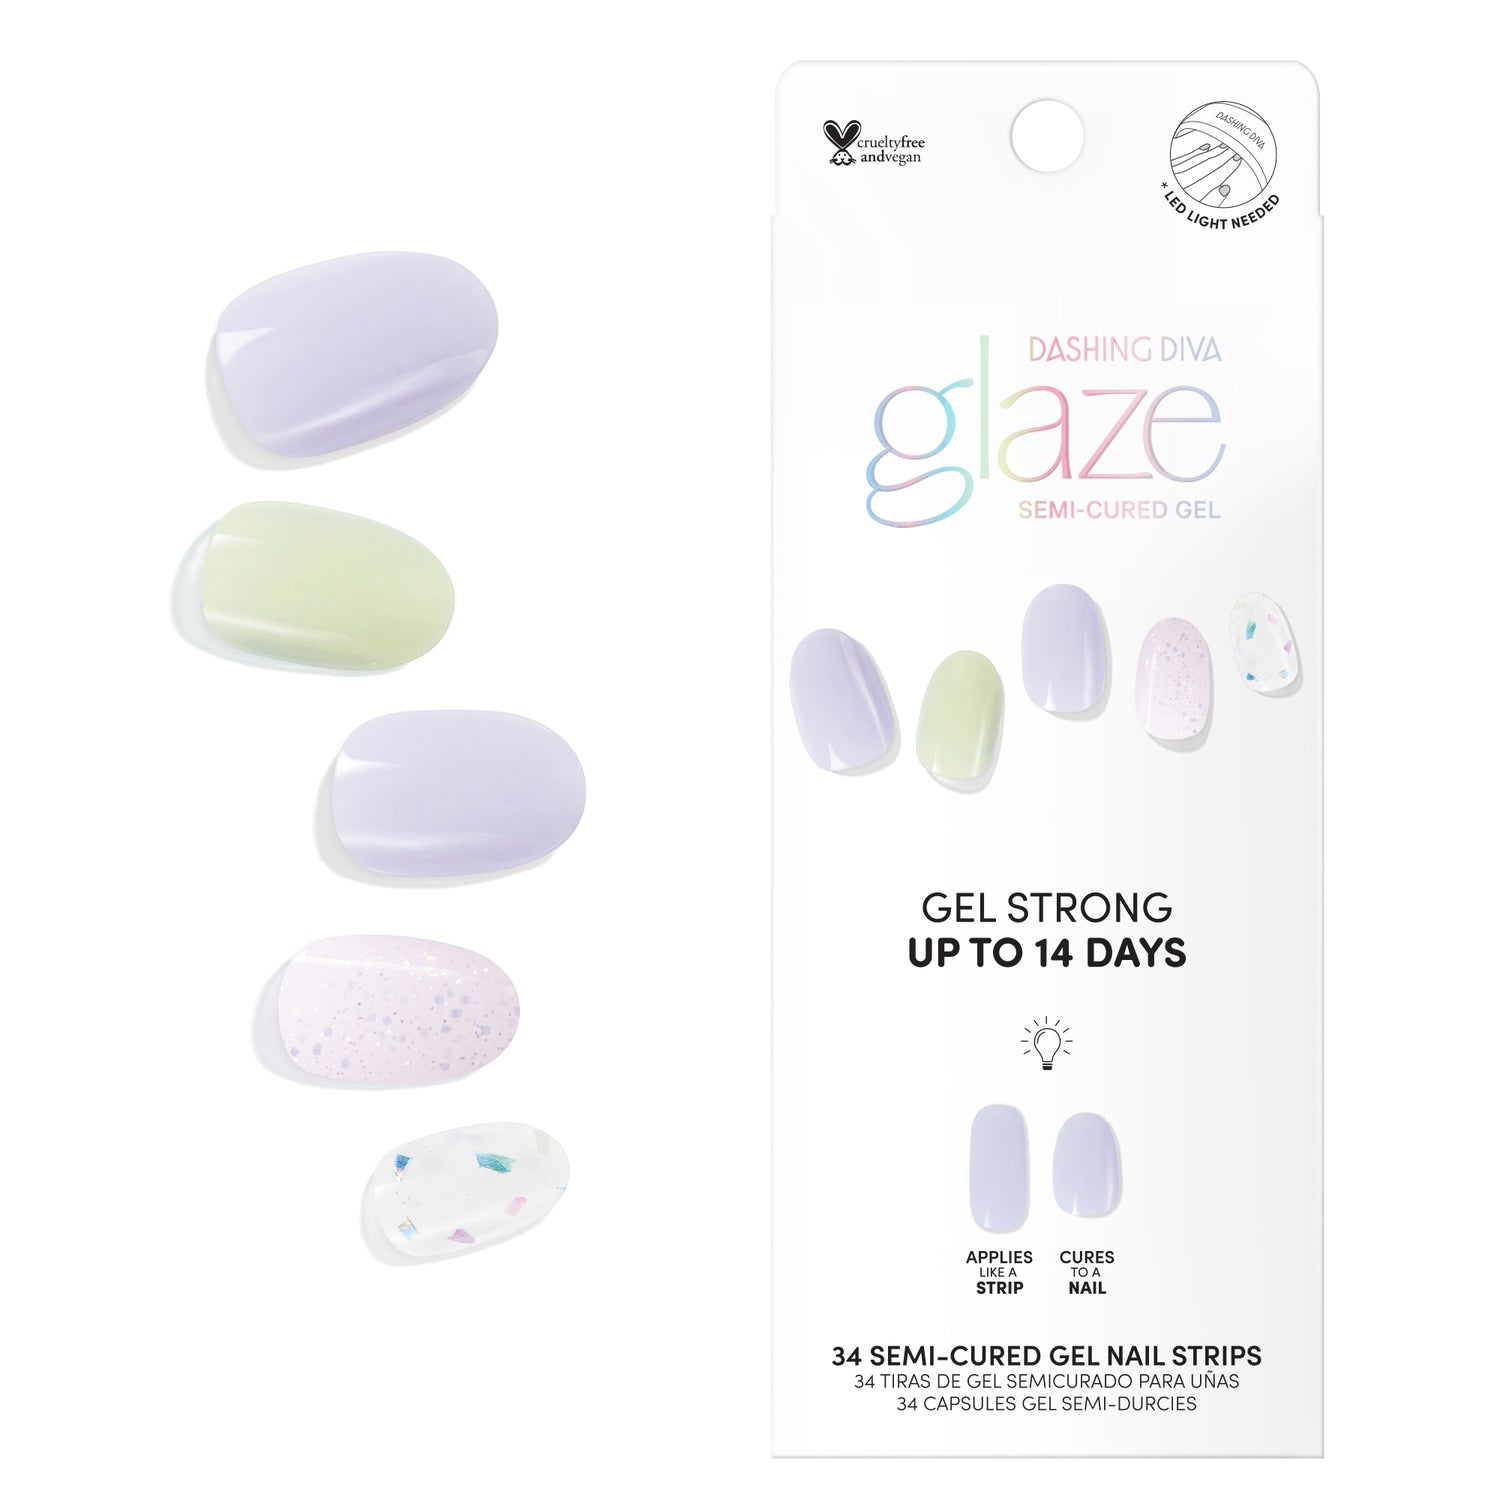 Dashing Diva GLAZE Spring purple and green semi cured gel nail strips with iridescent mosaic accents.